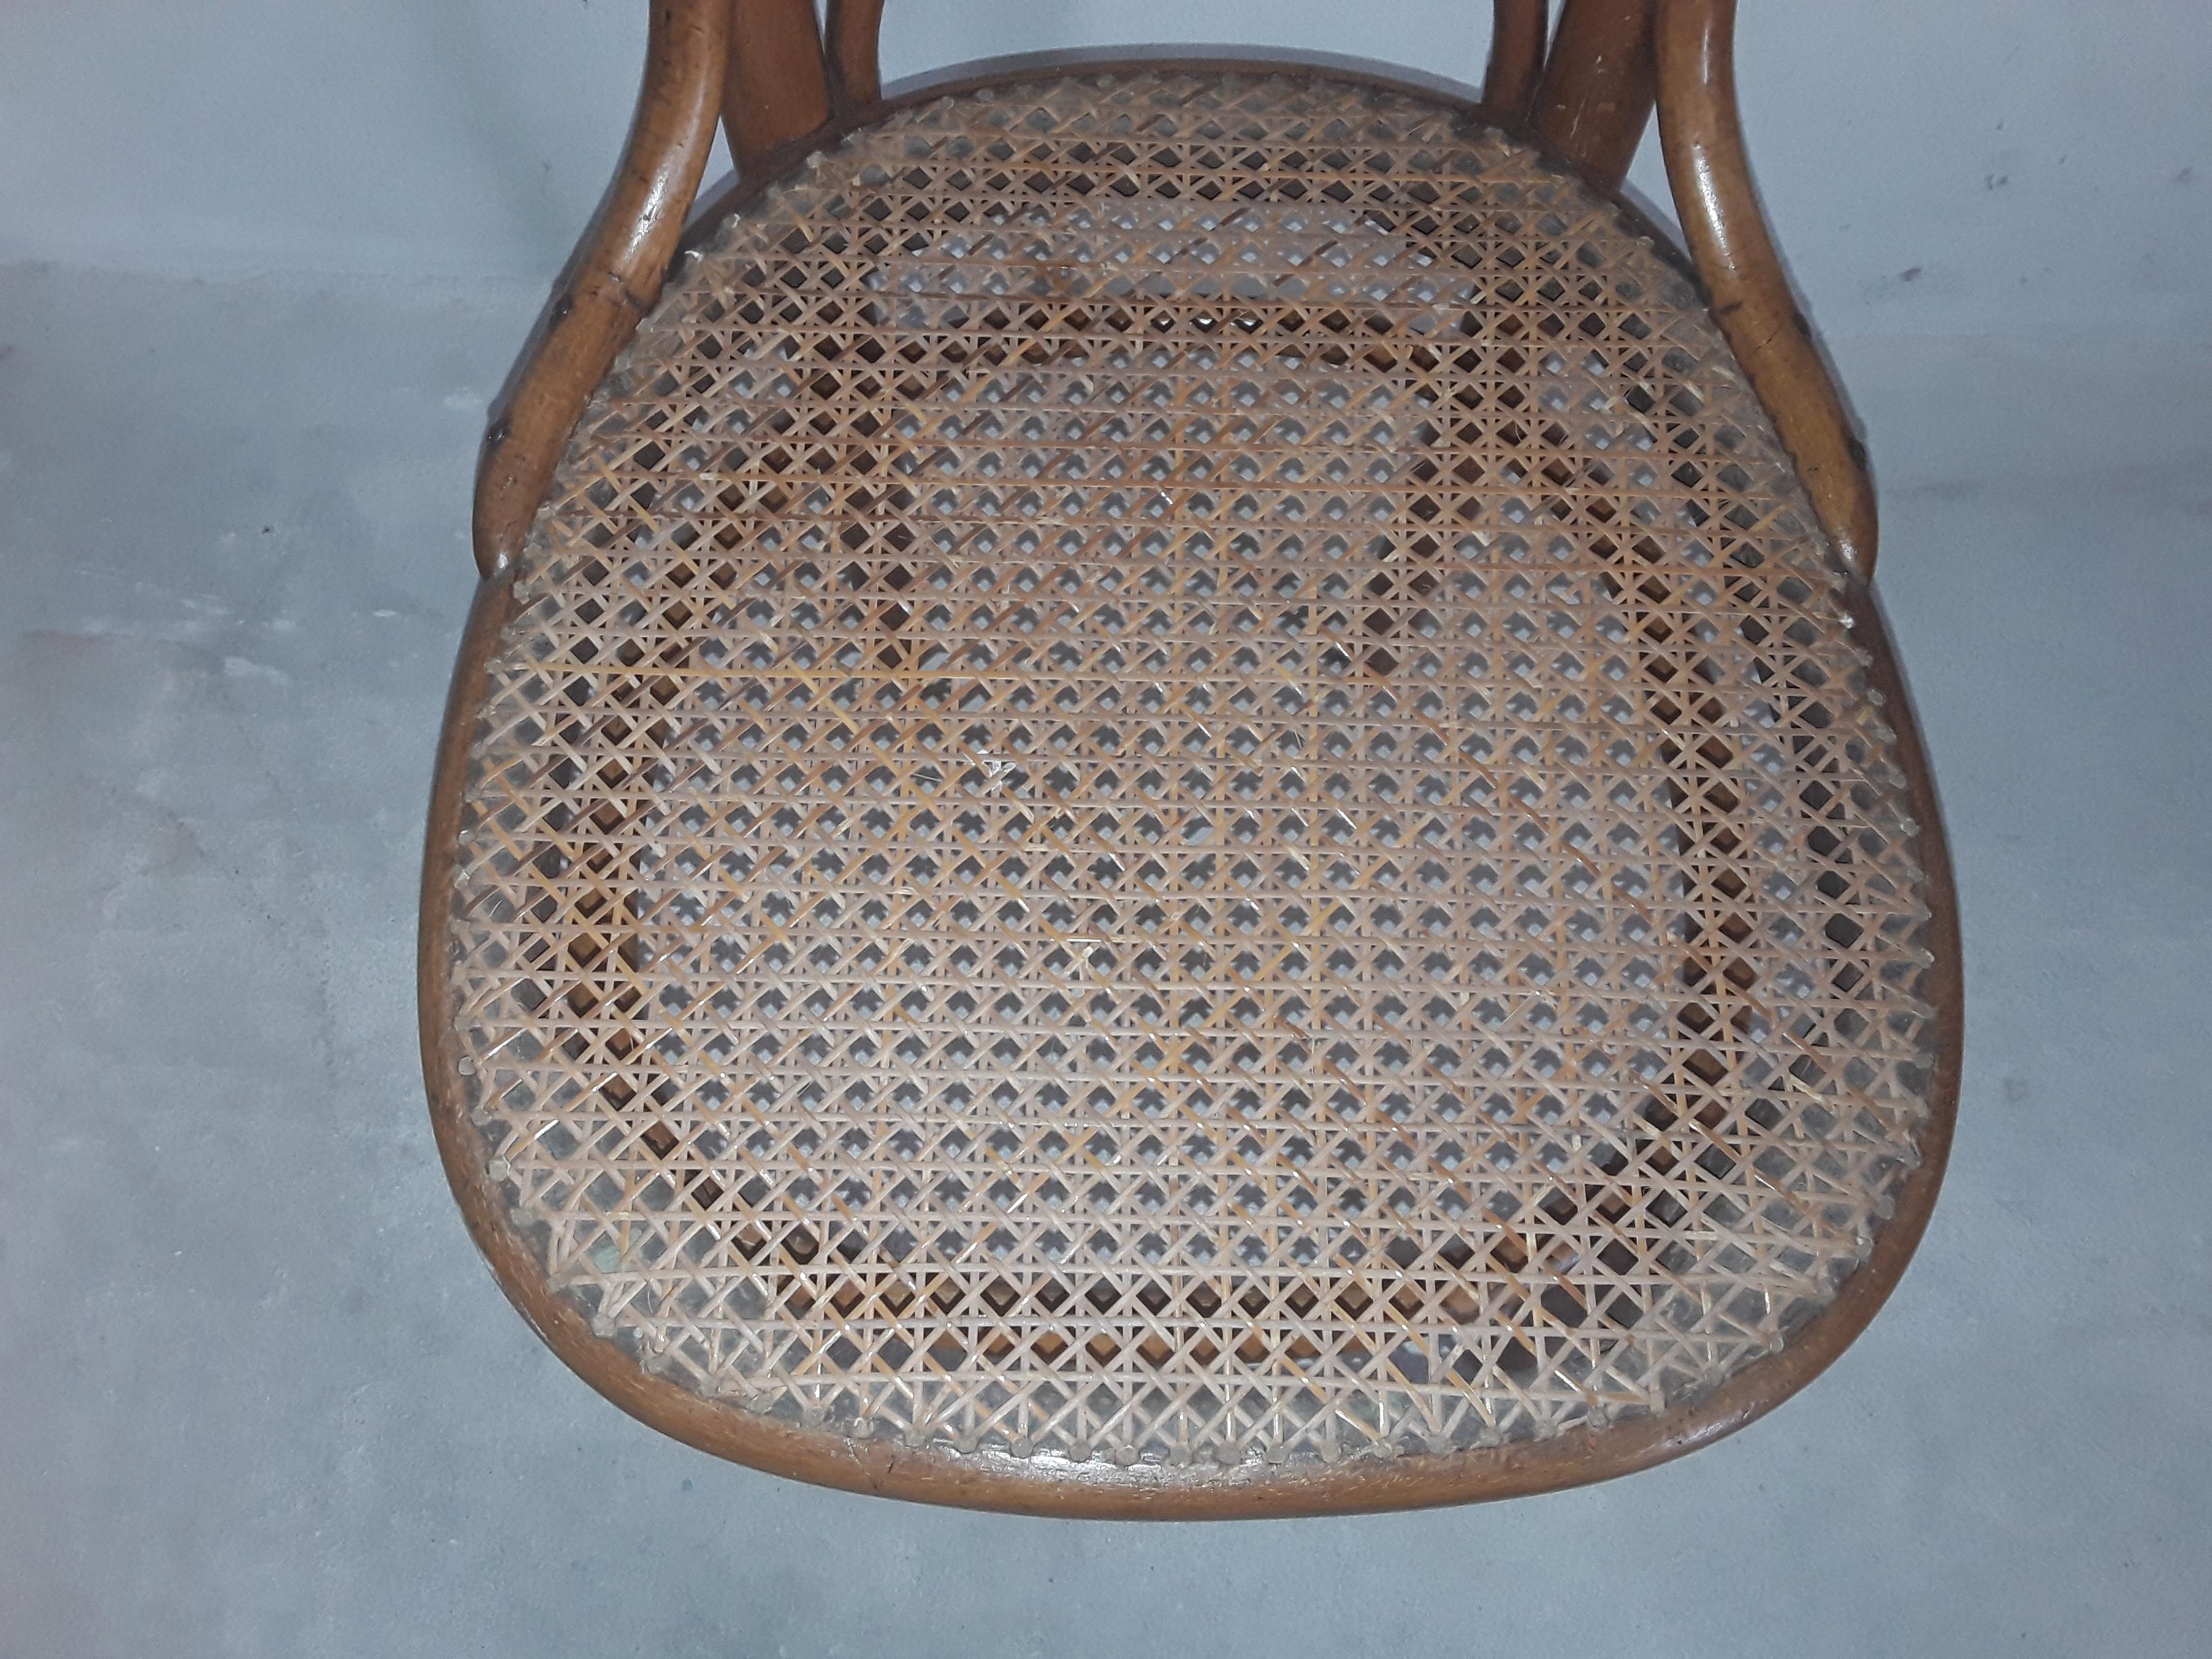 Thonet no 17 made in 1862 with 1 st label and stamp.